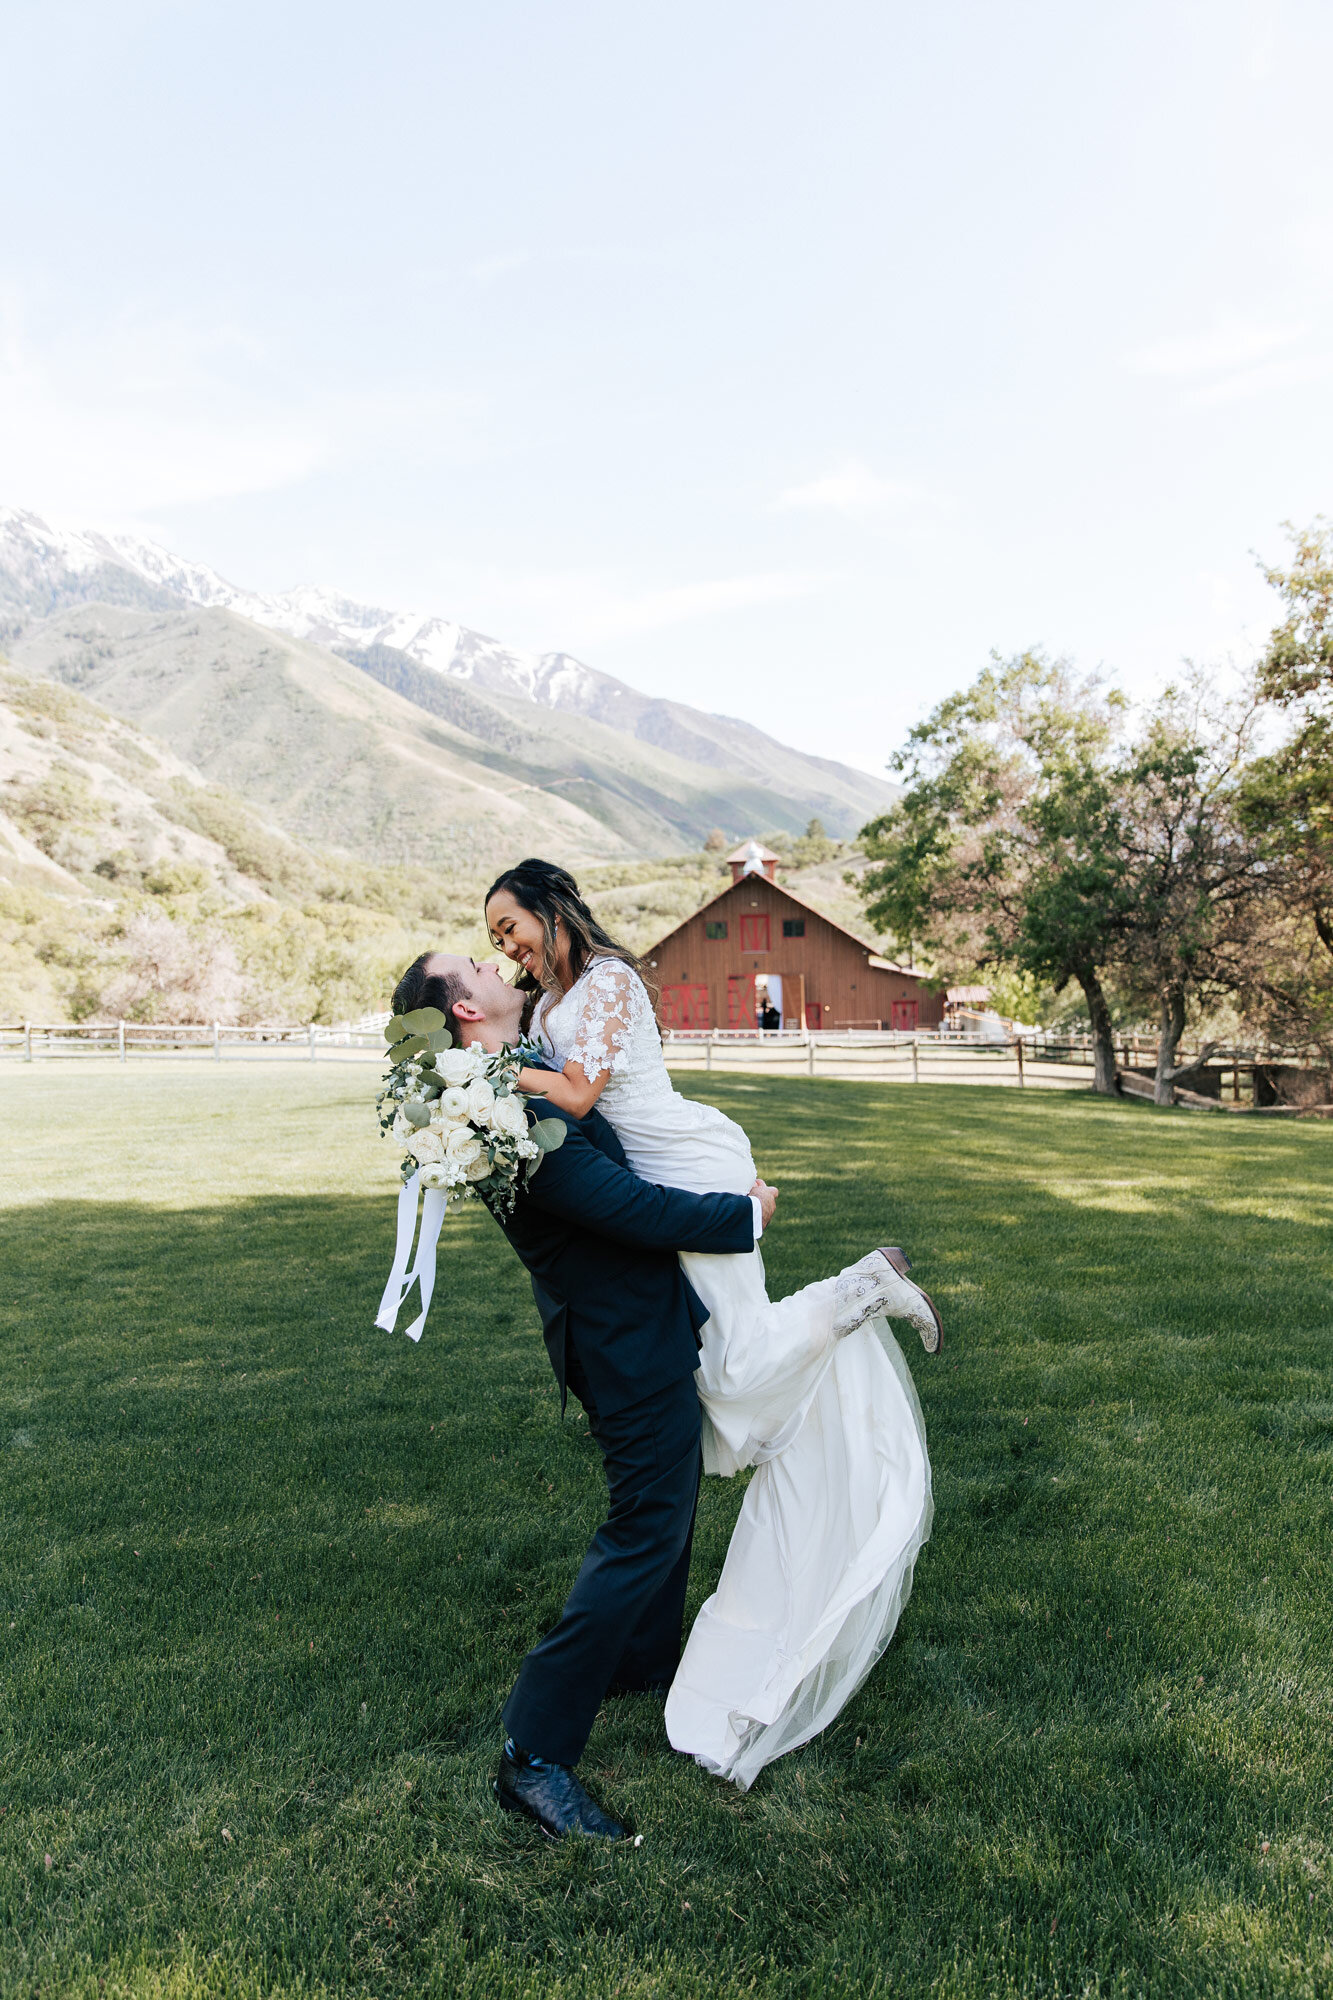  With blue sky and brown barn behind a groom holds his bride up in his arms as she goes in for a kiss in Utah County by Emily Jenkins Photography. blue sky wedding photos country summer wedding in Utah #emilyjenkinsphotography #emilyjenkinsweddings #